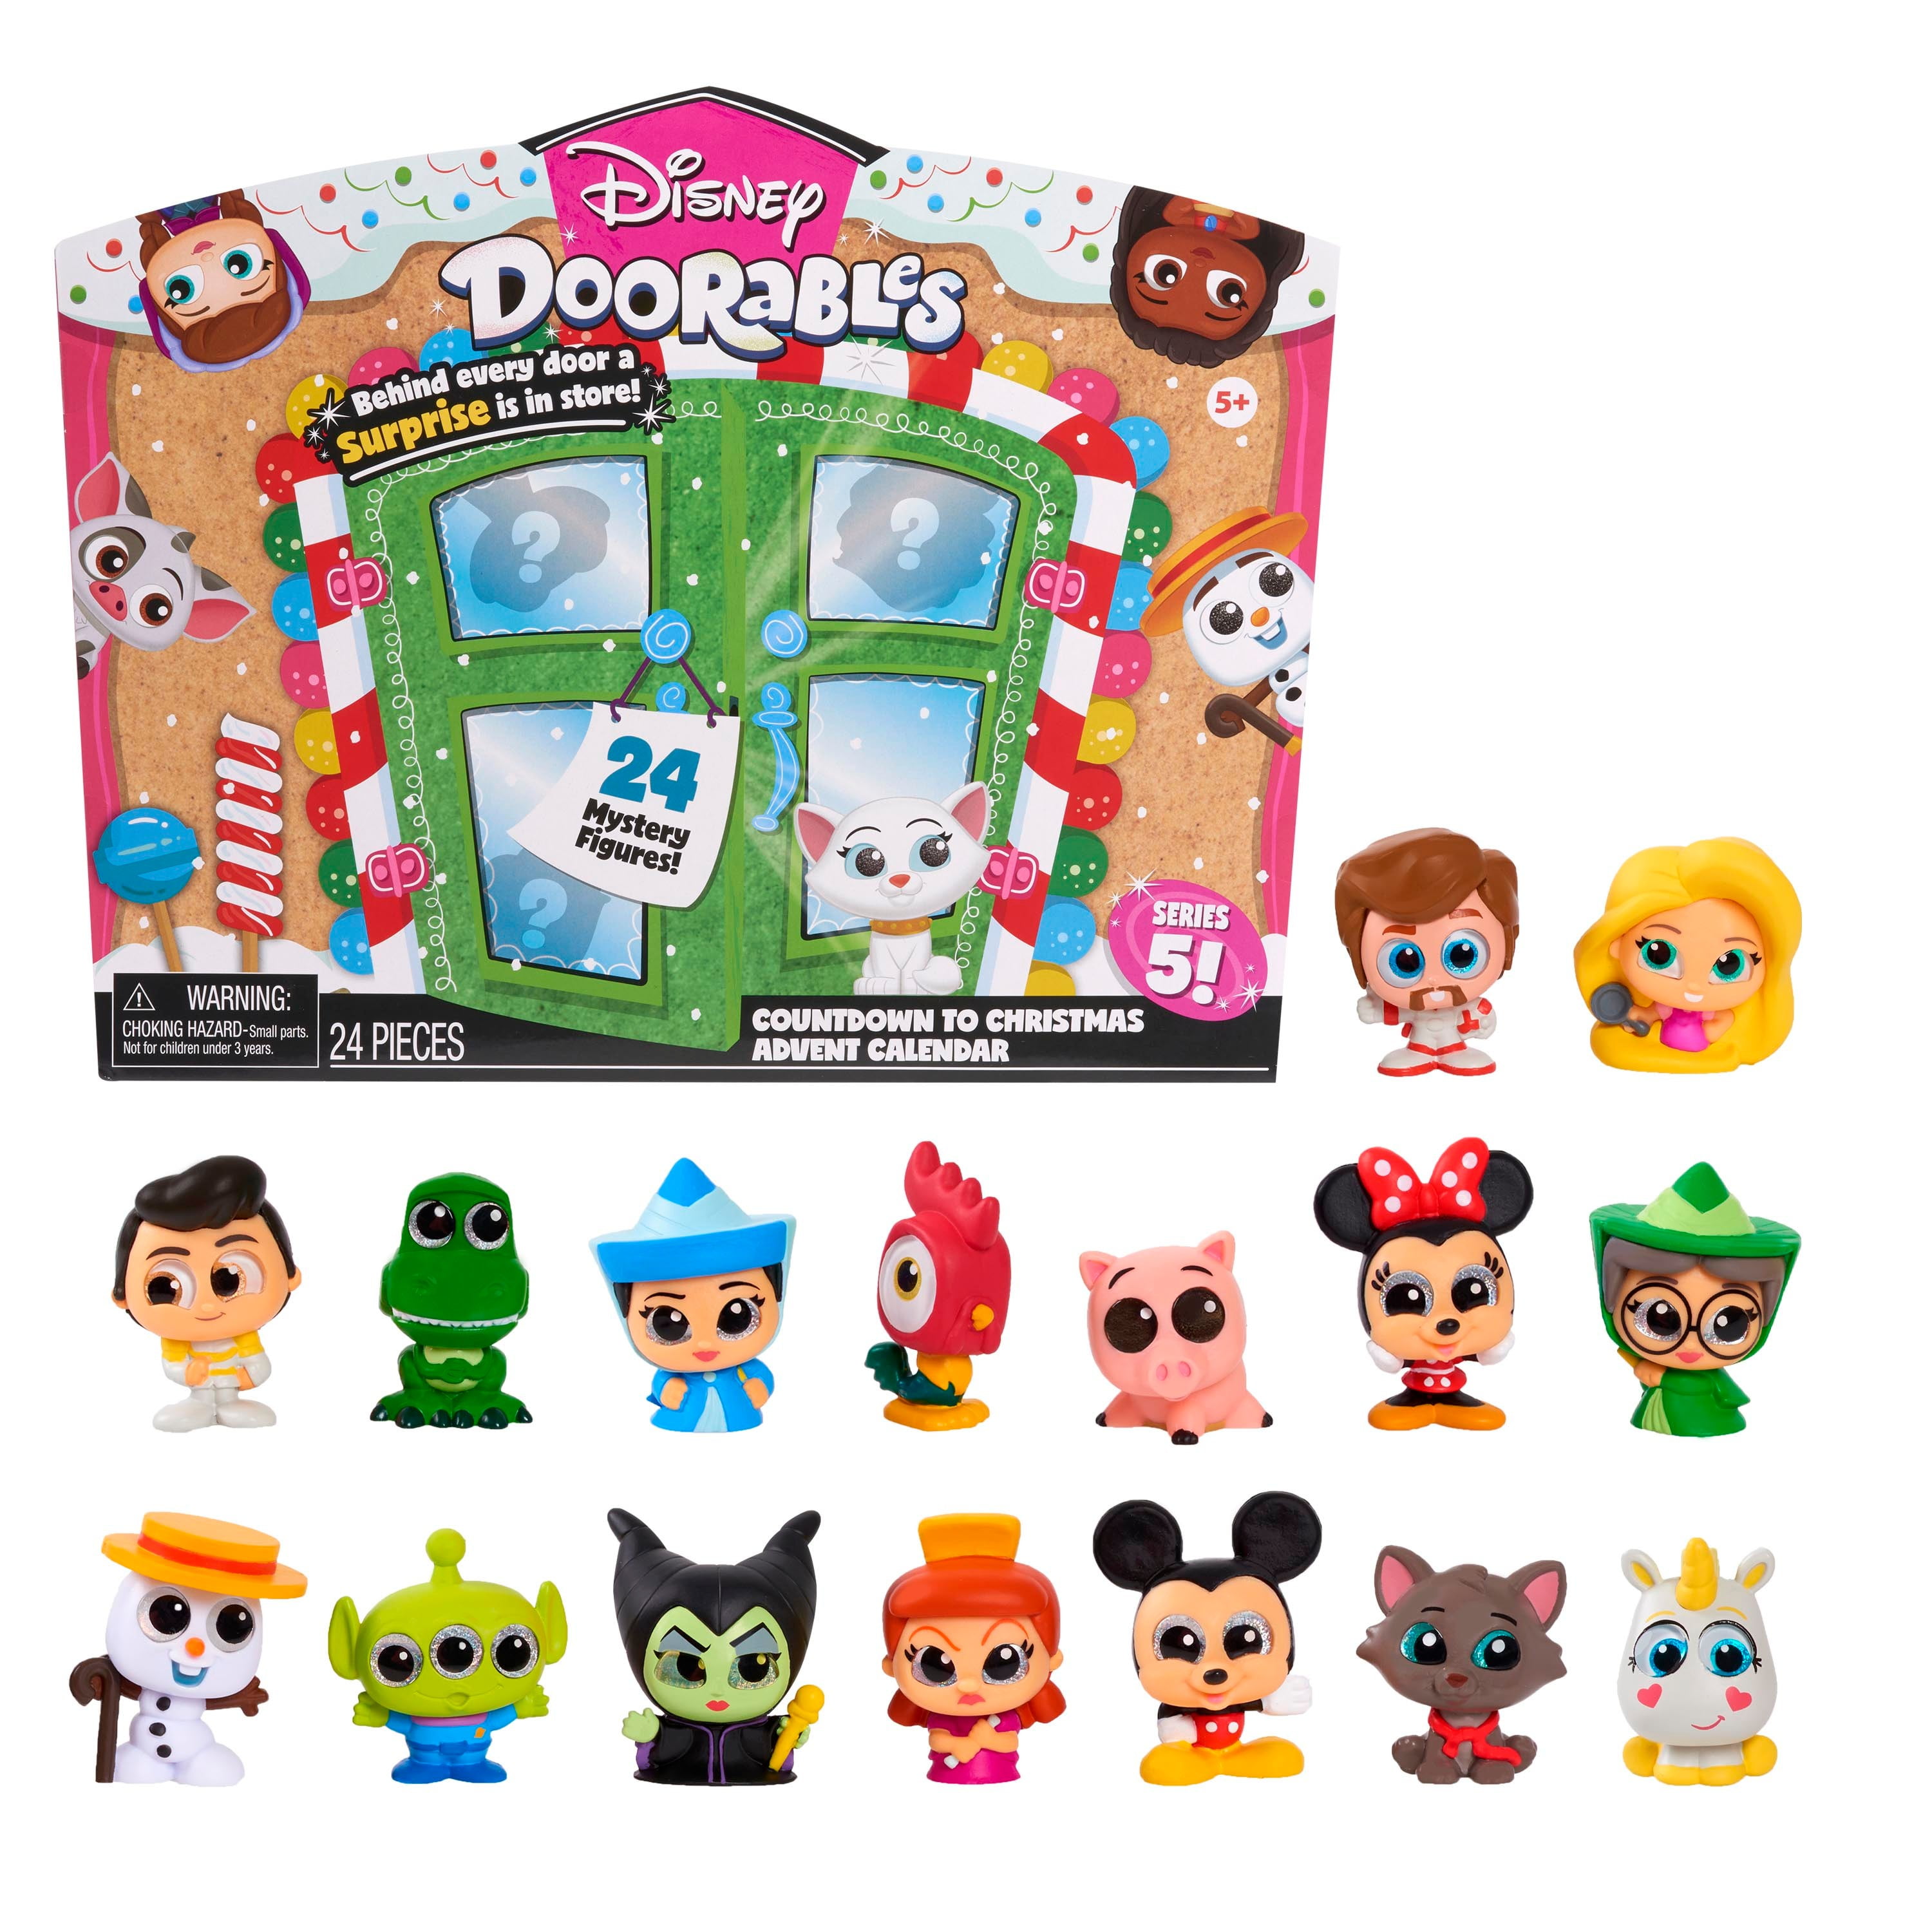 Disney Doorables Countdown to Christmas Advent Calendar, Kids Toys for Ages 5 up